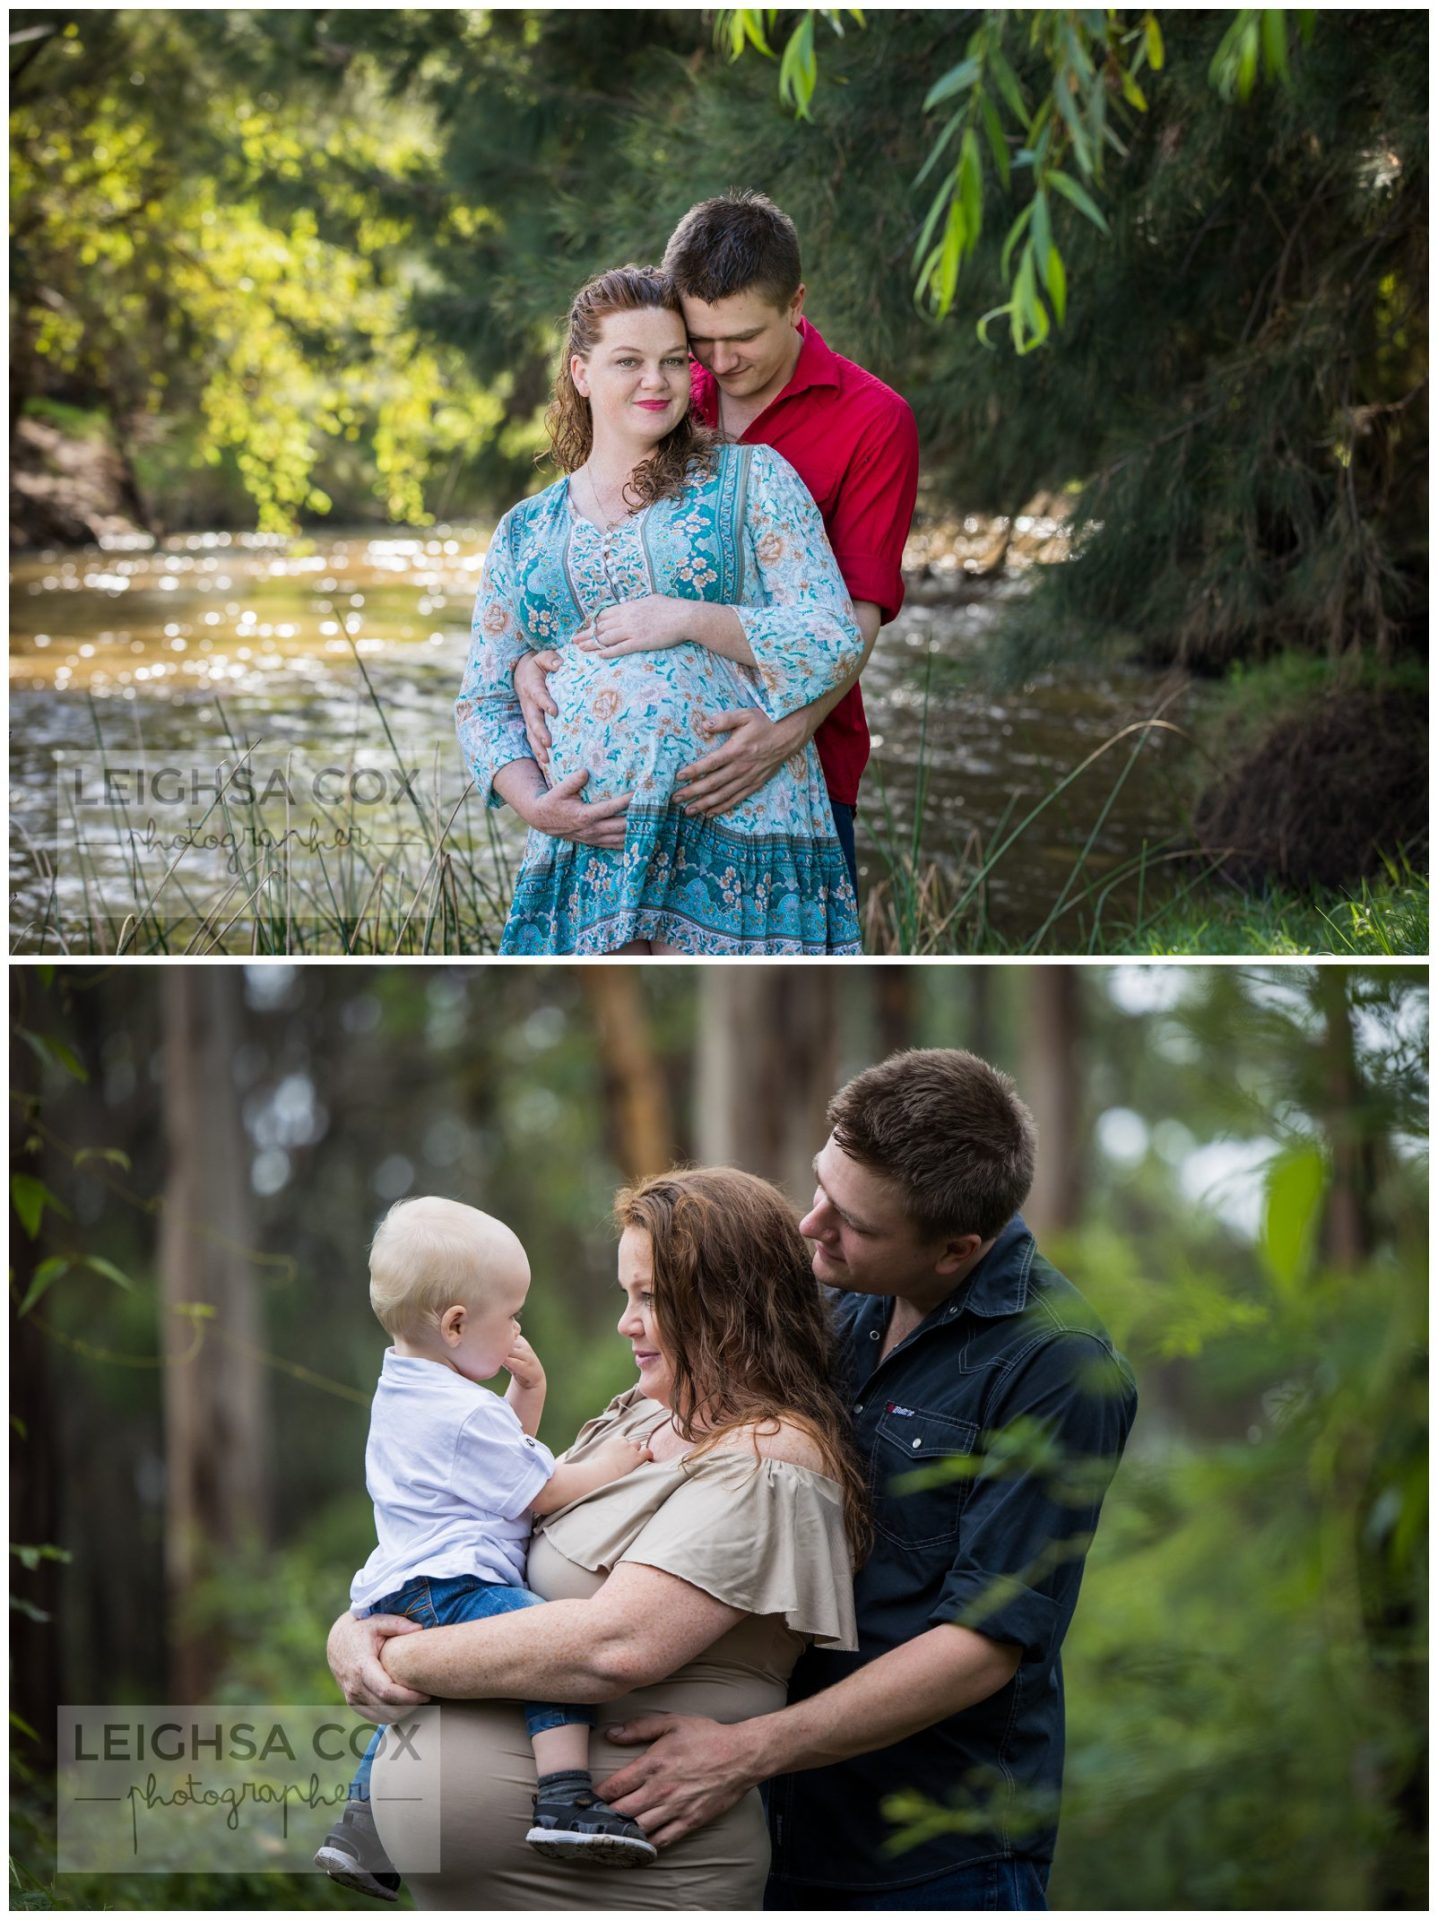 Maitland Photographer for life, pregnancy session